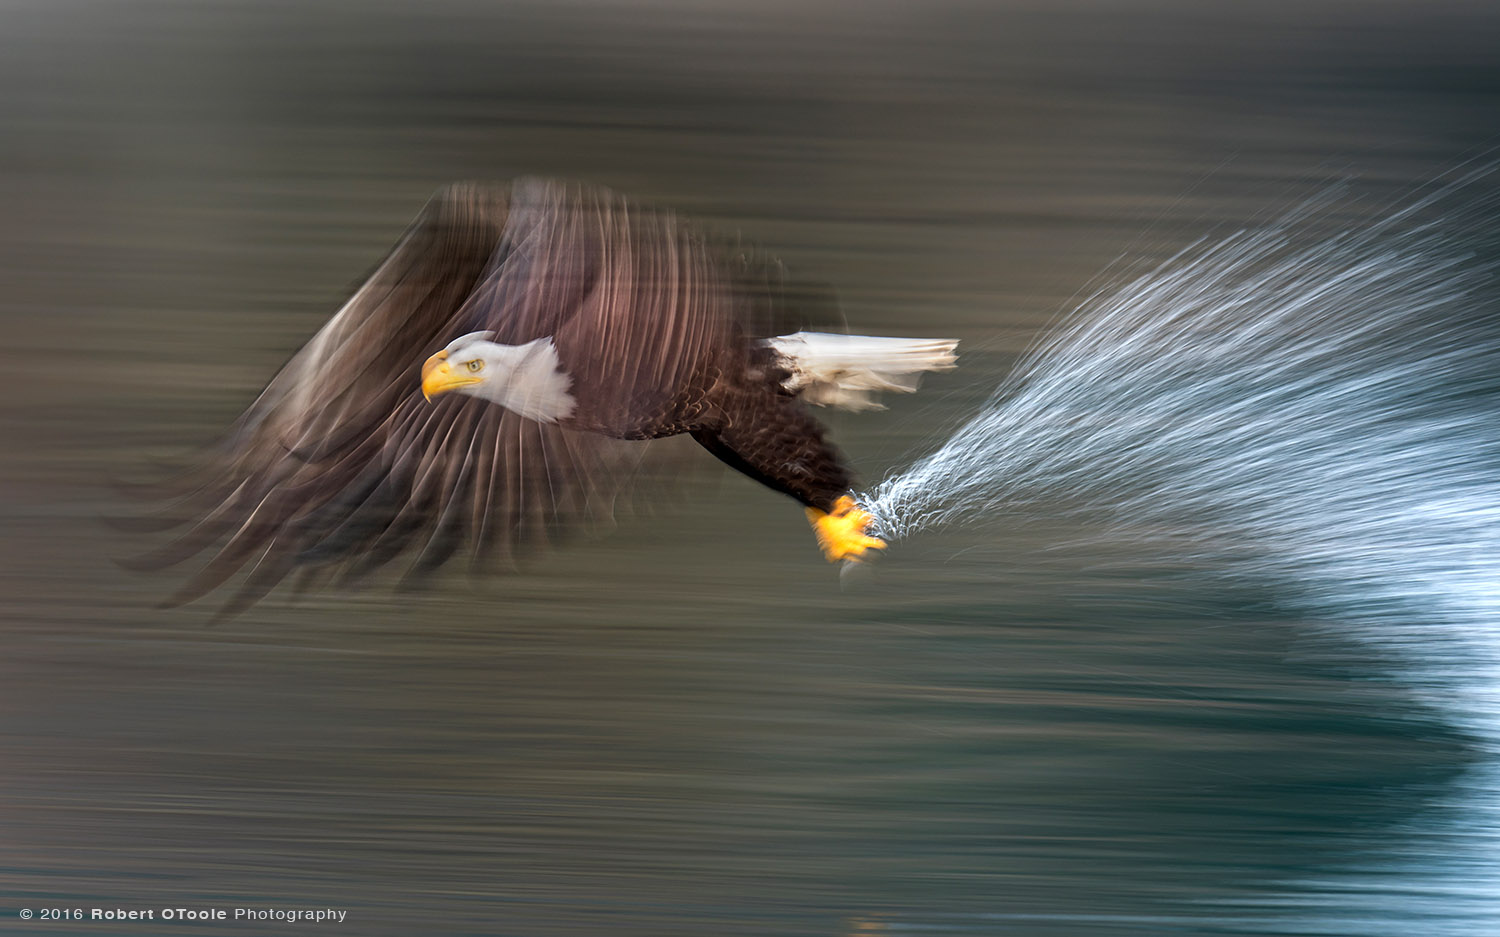 Bald Eagle Striking the Water at 1/20th s